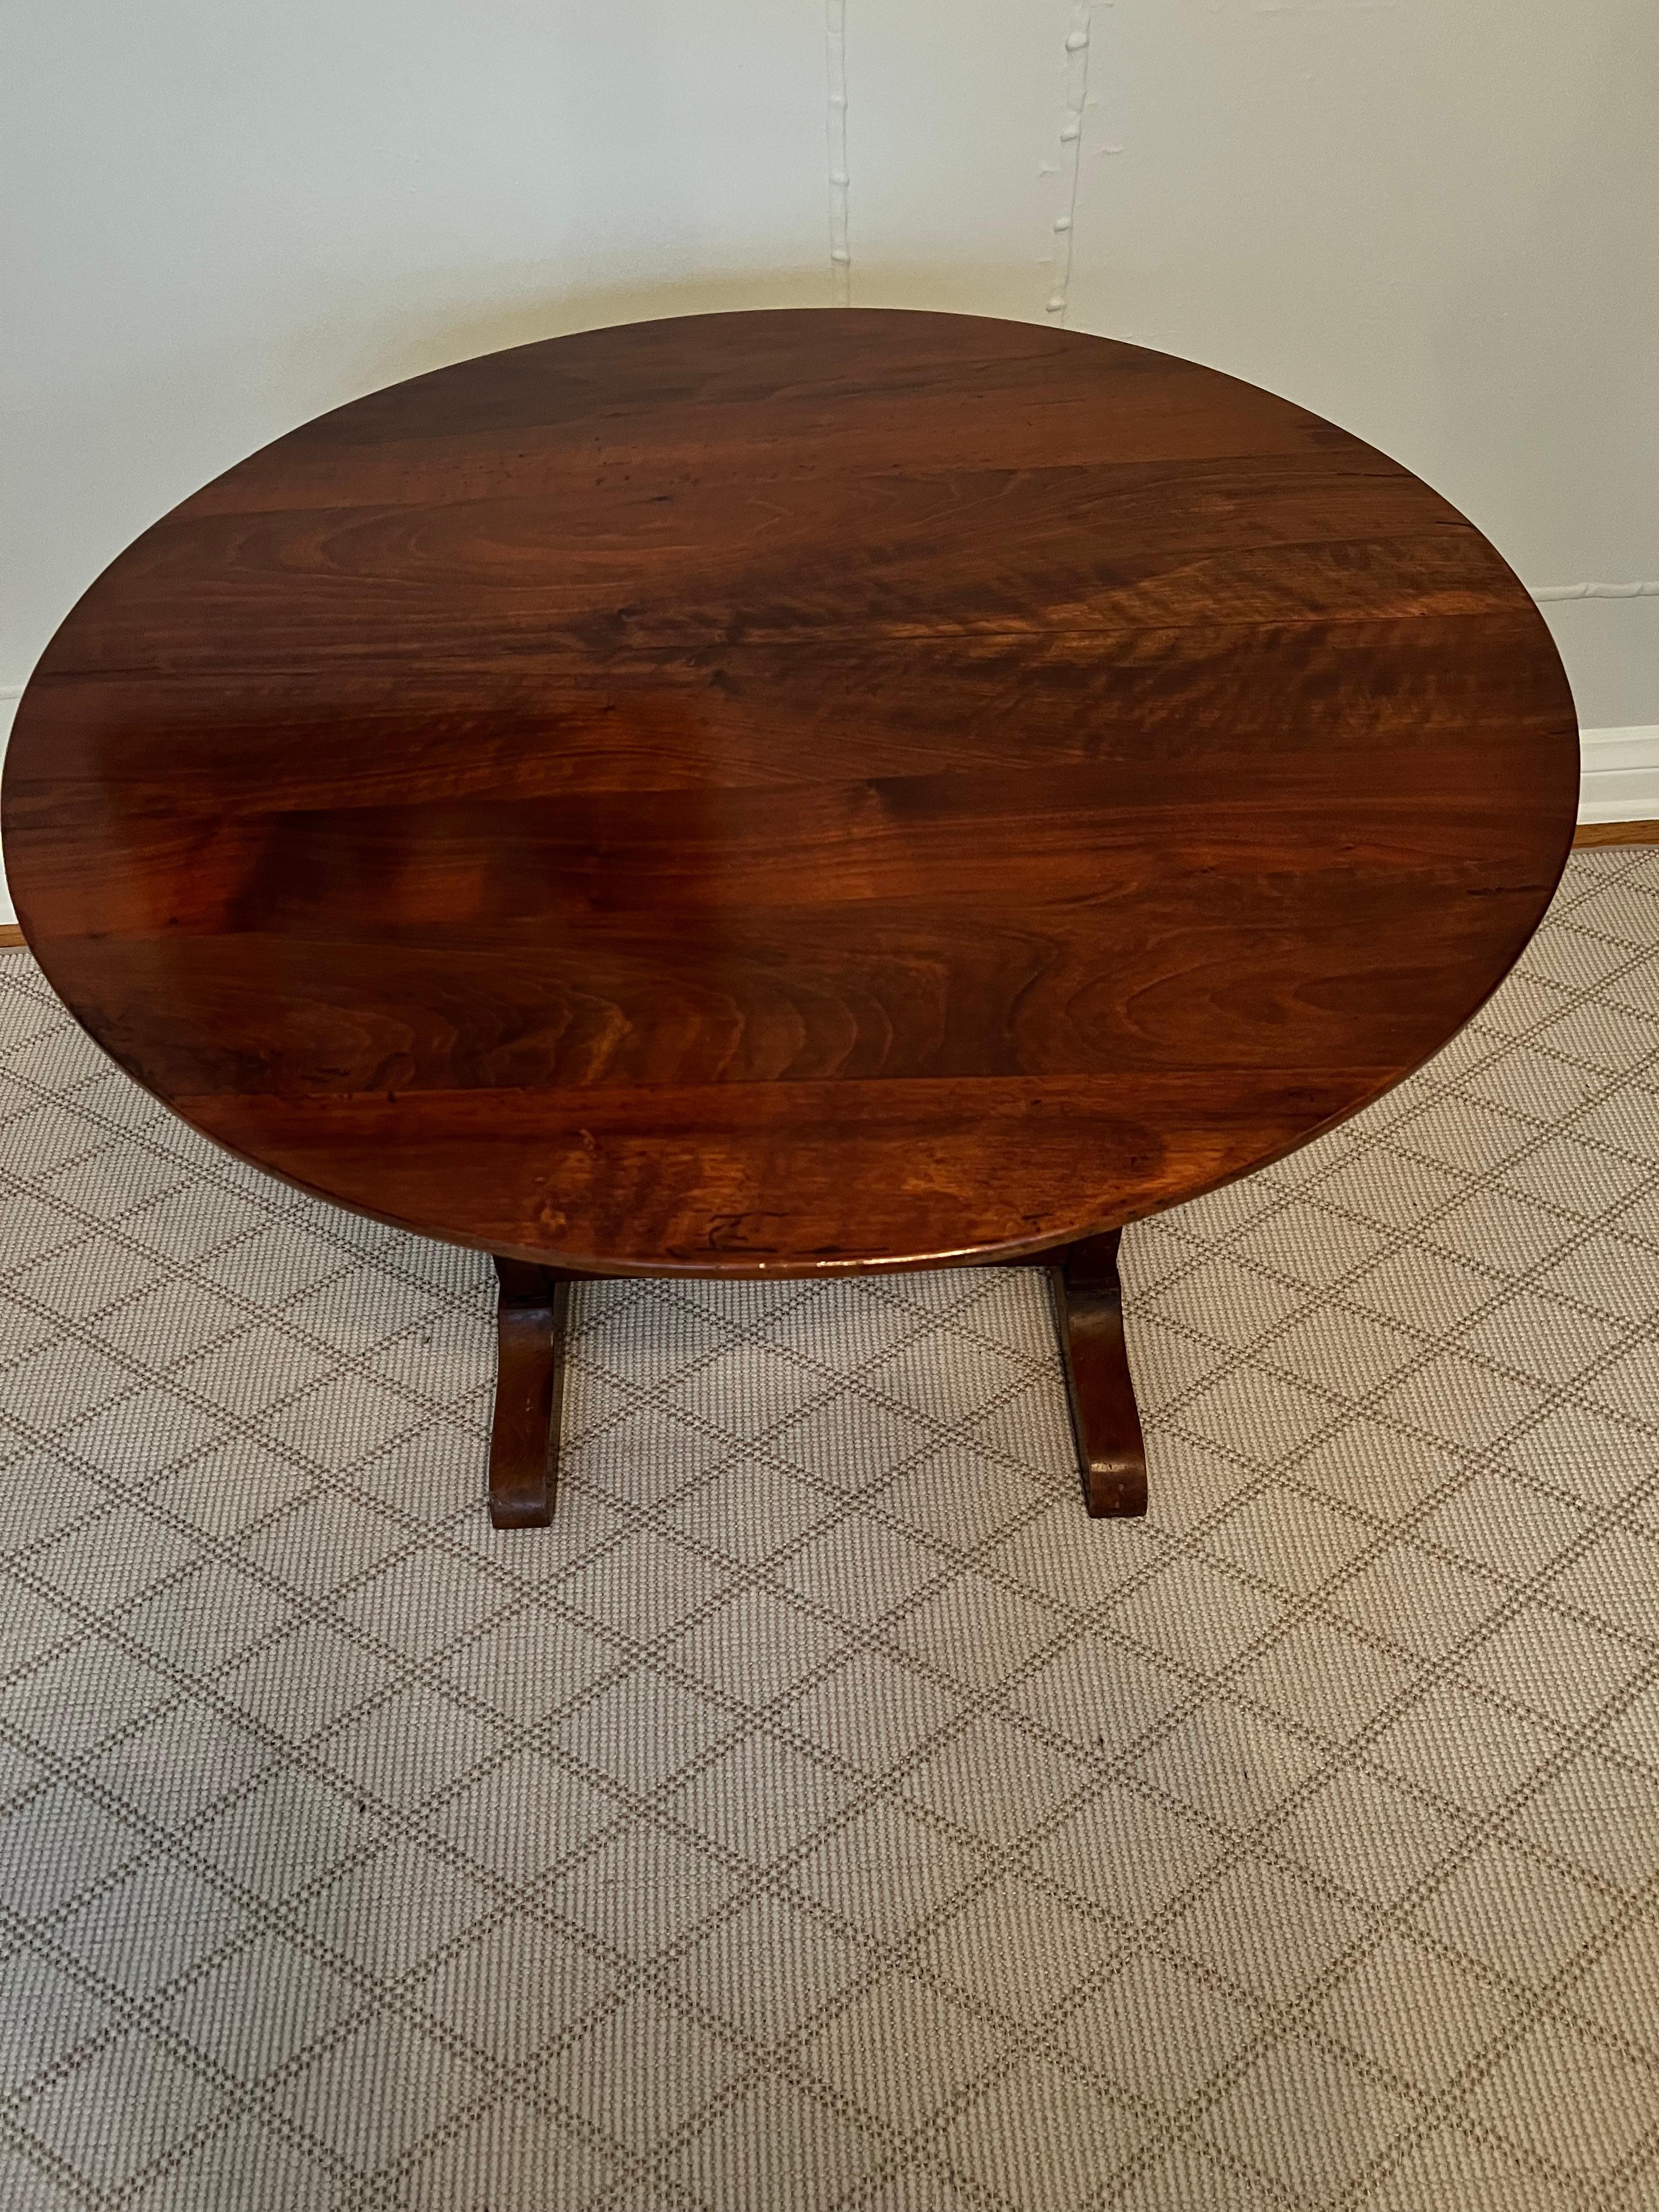 19th C. French Wine Tasting Cherry Wood Tilt Top Table  7